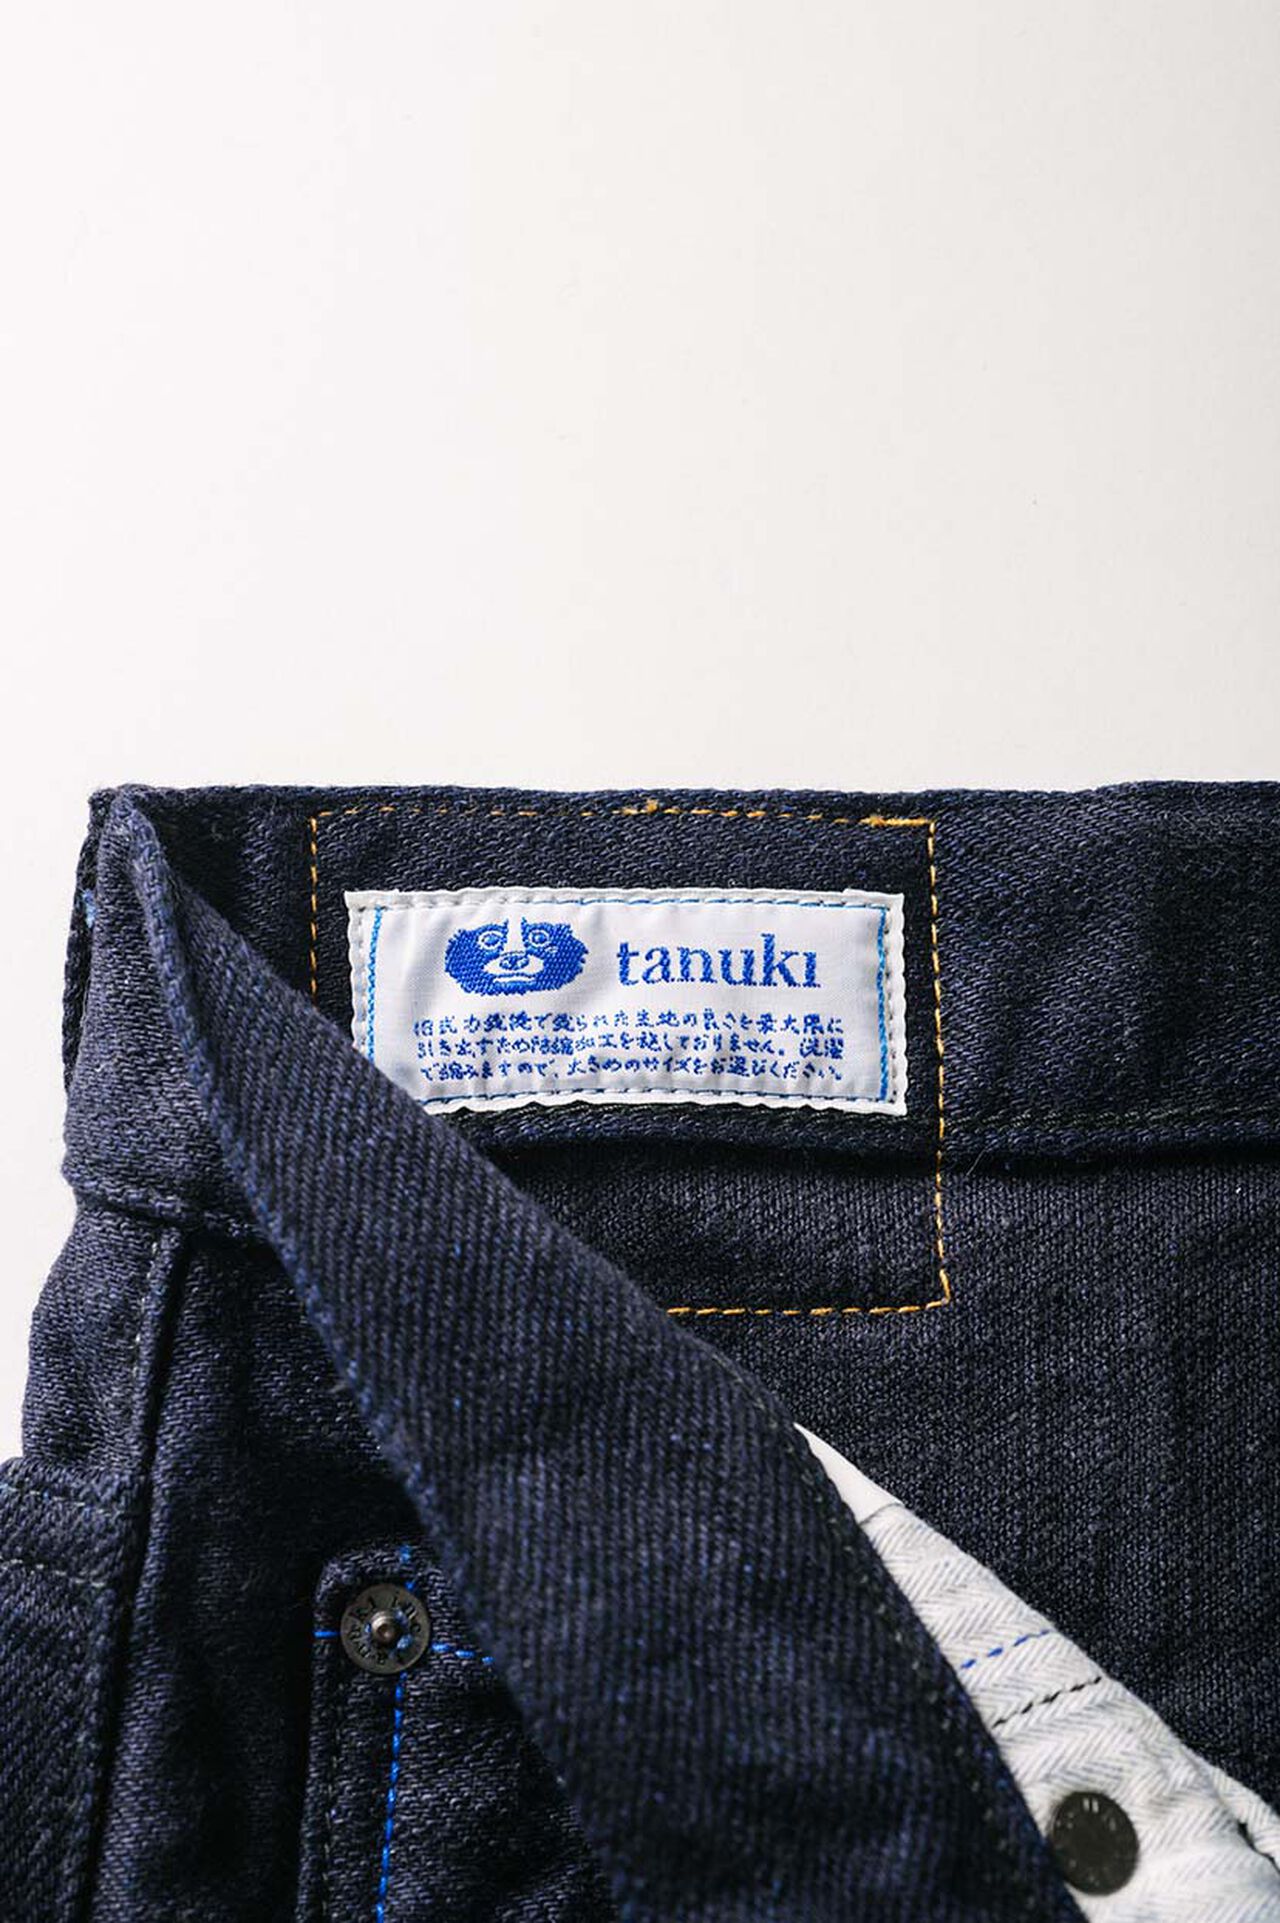 SI2027HT
"Sizima" 19oz High Tapered Jeans,, large image number 6